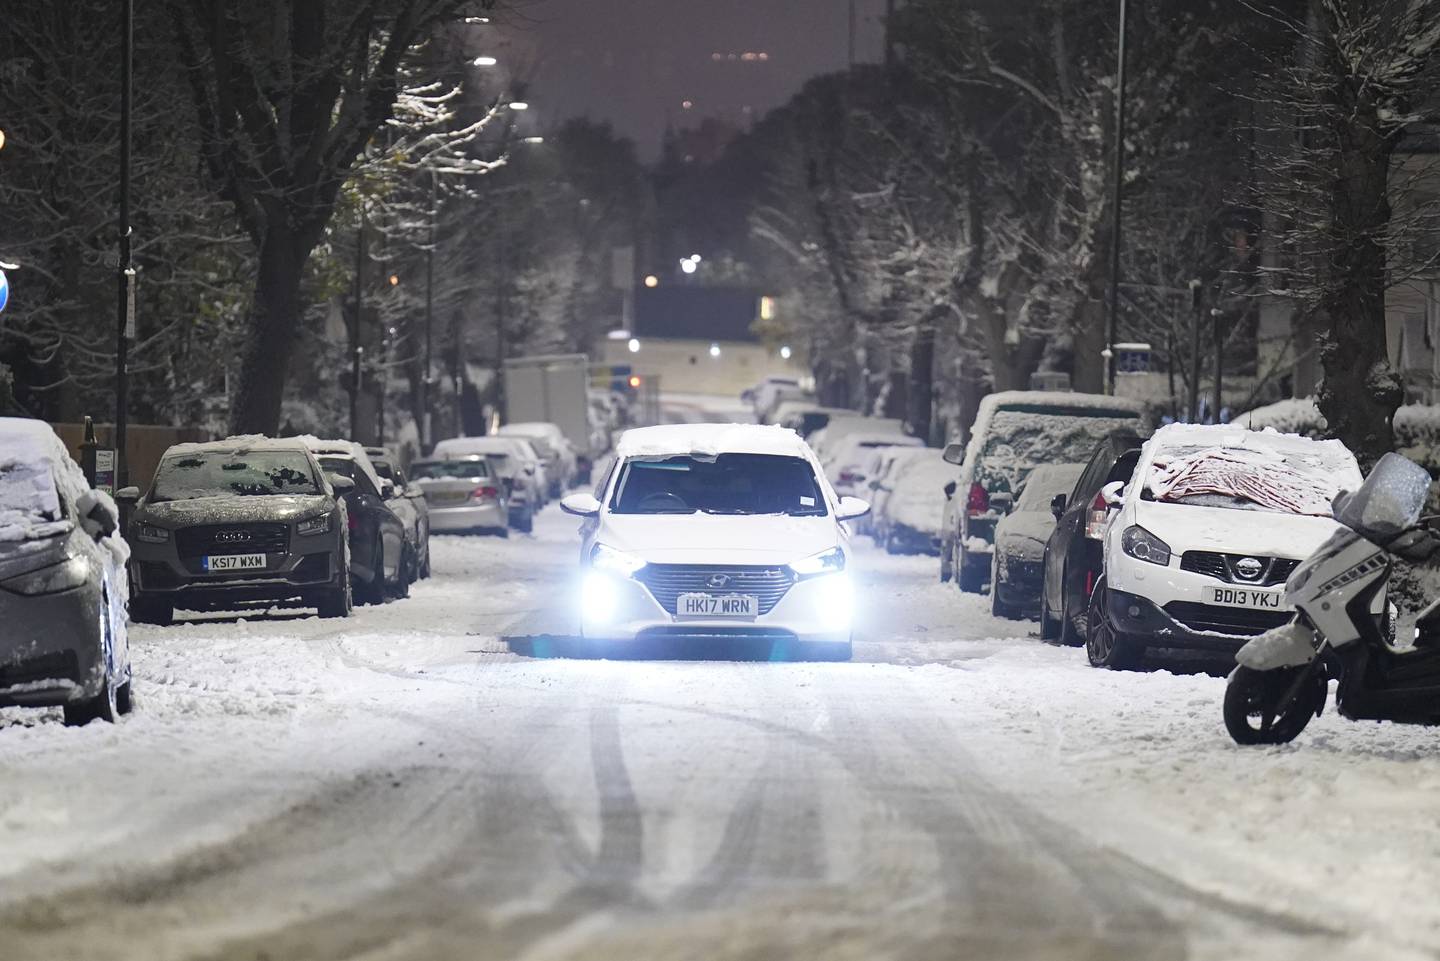 Yellow alerts for ice, fog and snow are in place for much of the UK and are expected to cause travel disruption during Monday’s morning rush hour. PA